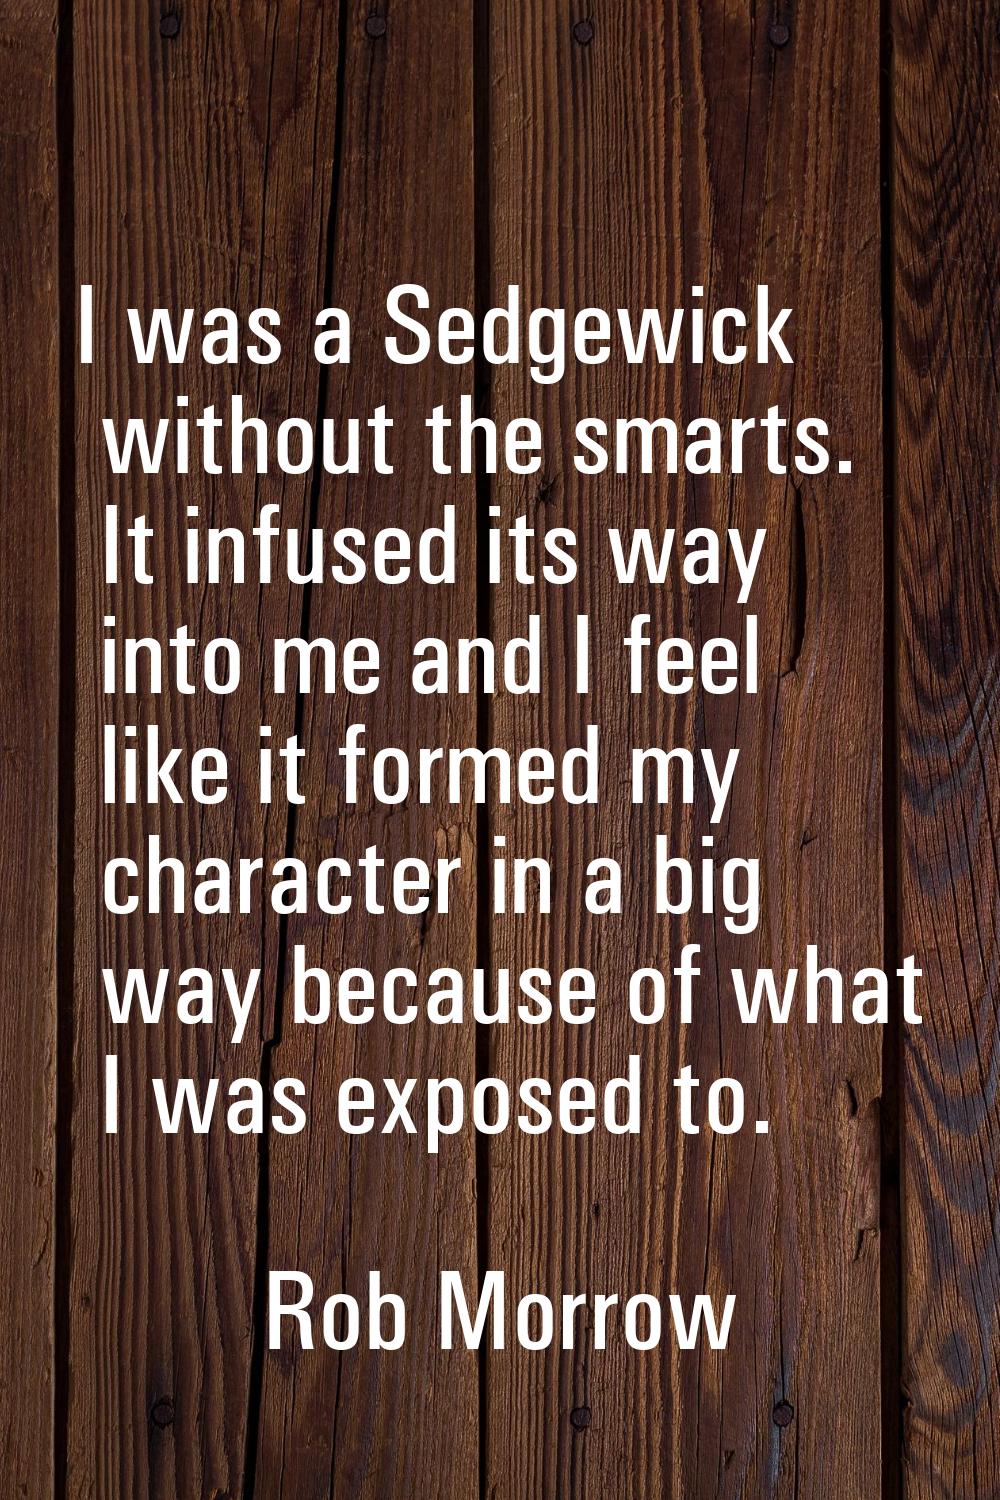 I was a Sedgewick without the smarts. It infused its way into me and I feel like it formed my chara